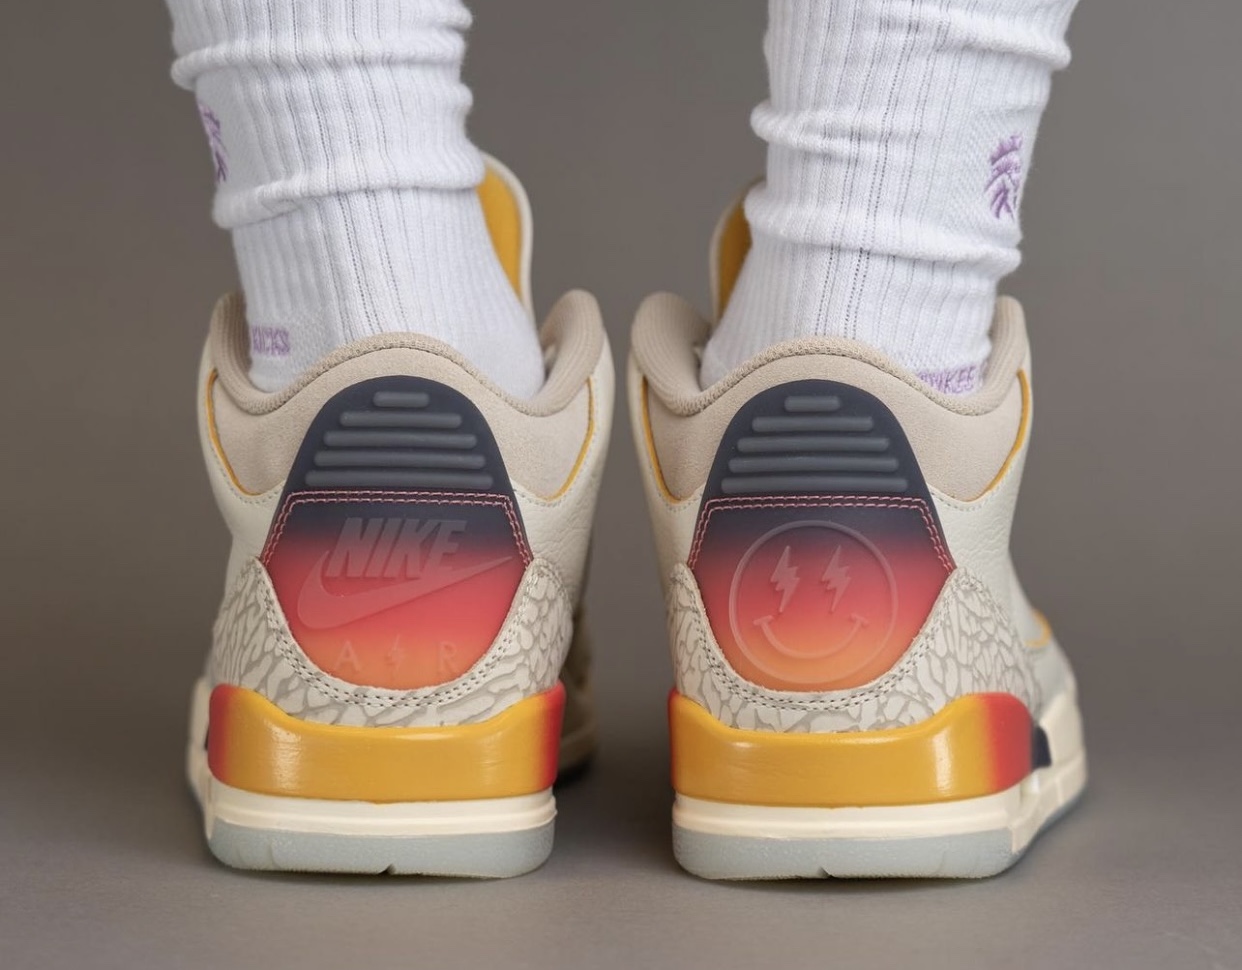 The J Balvin x Air Jordan 3 “Medellín Sunset” drops this month for $250 🌅  Will you be trying for a pair? 👀 @nicedrops LINK IN BIO for…